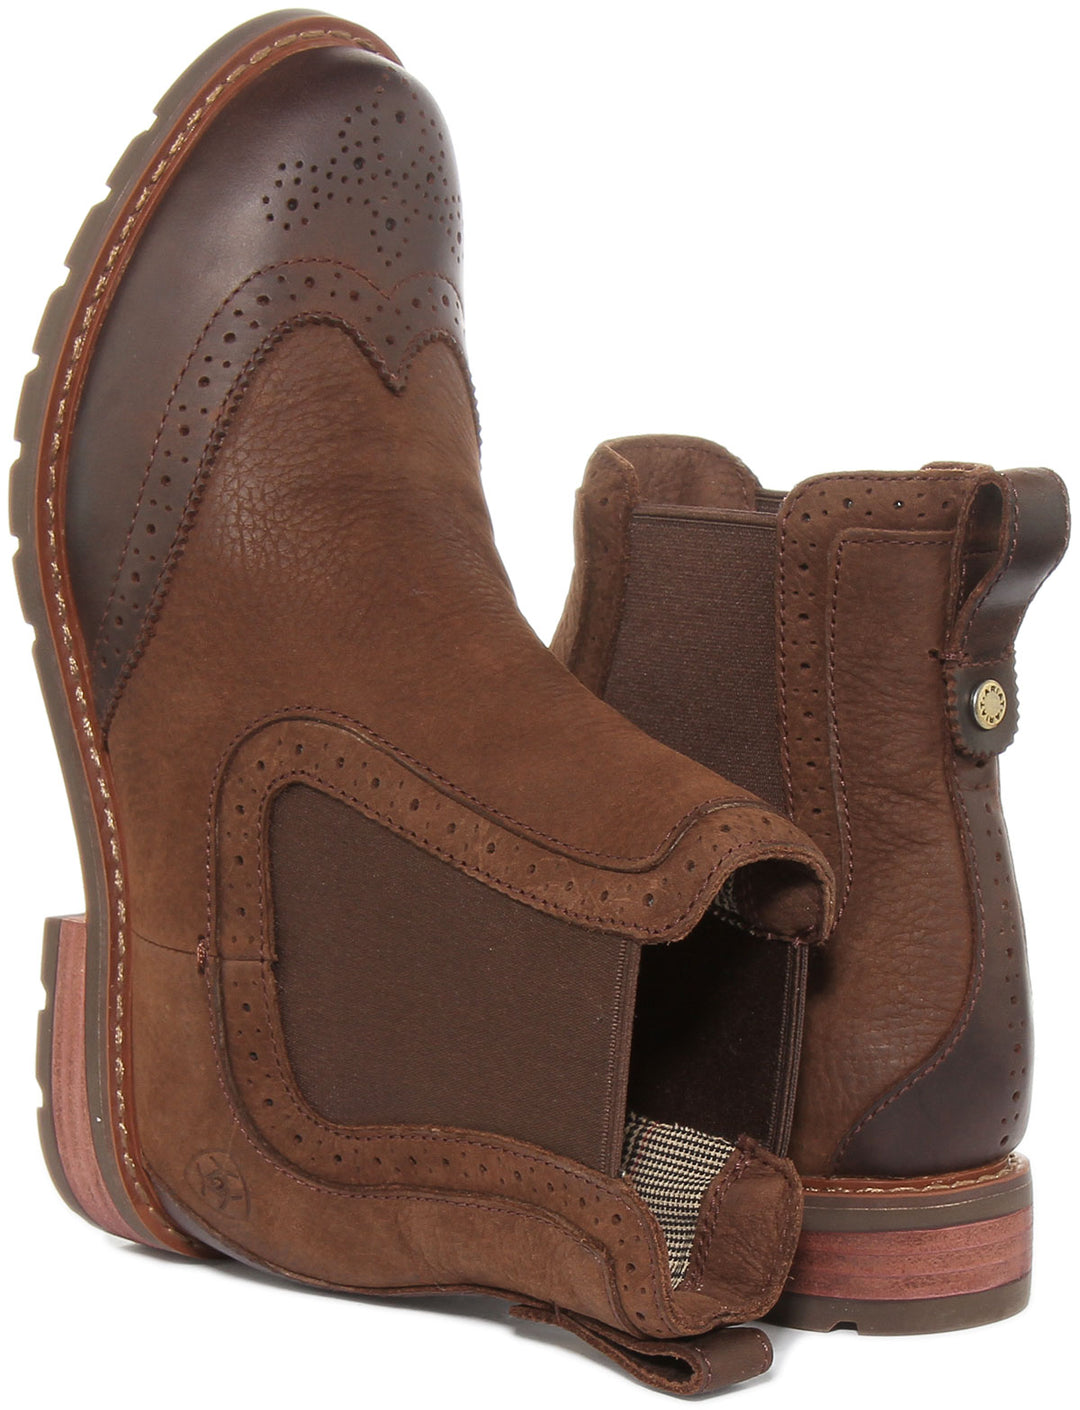 Ariat Wexford Brogue In Choco For Women